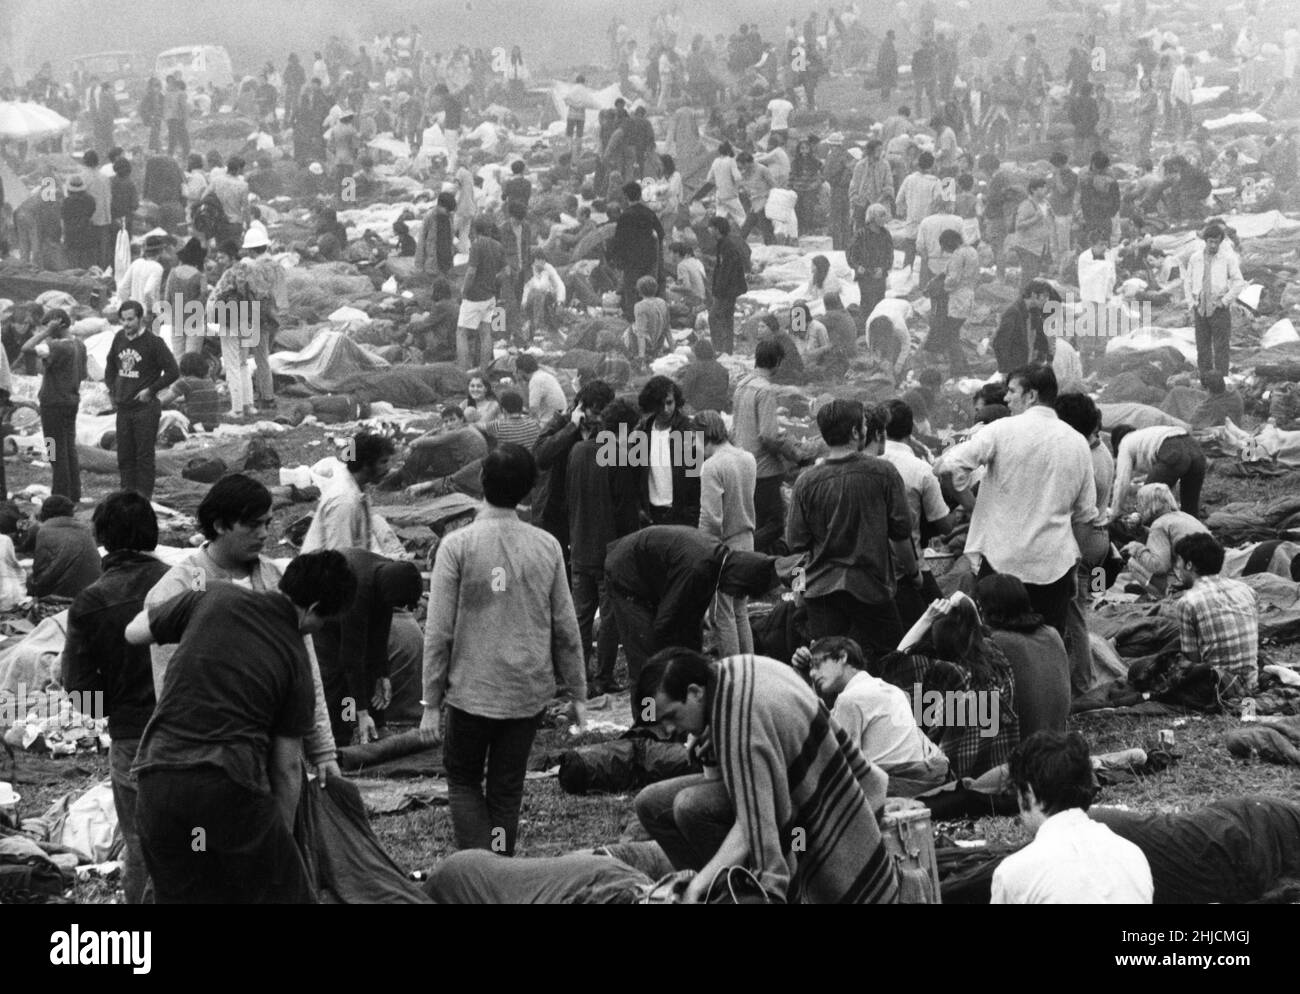 The Woodstock Music and Art Festival, a famous rock festival held at a dairy farm in Bethel, New York on August 15-17, 1969. Stock Photo